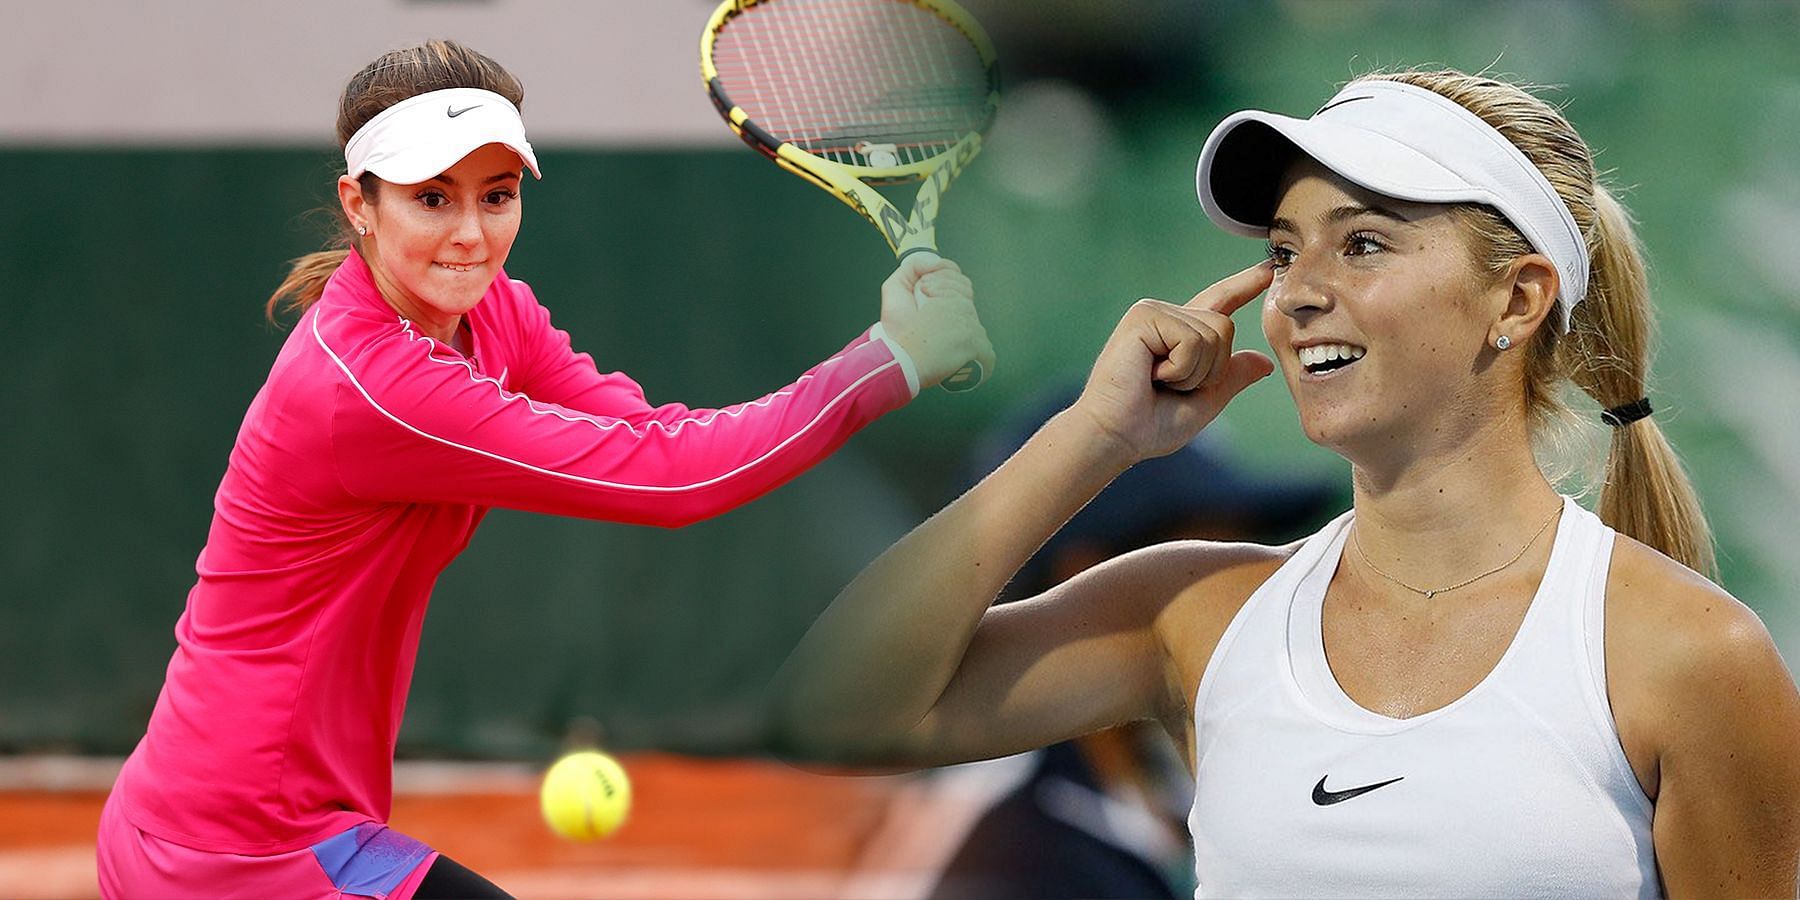 CiCi Bellis is continuing her tennis journey in a new way